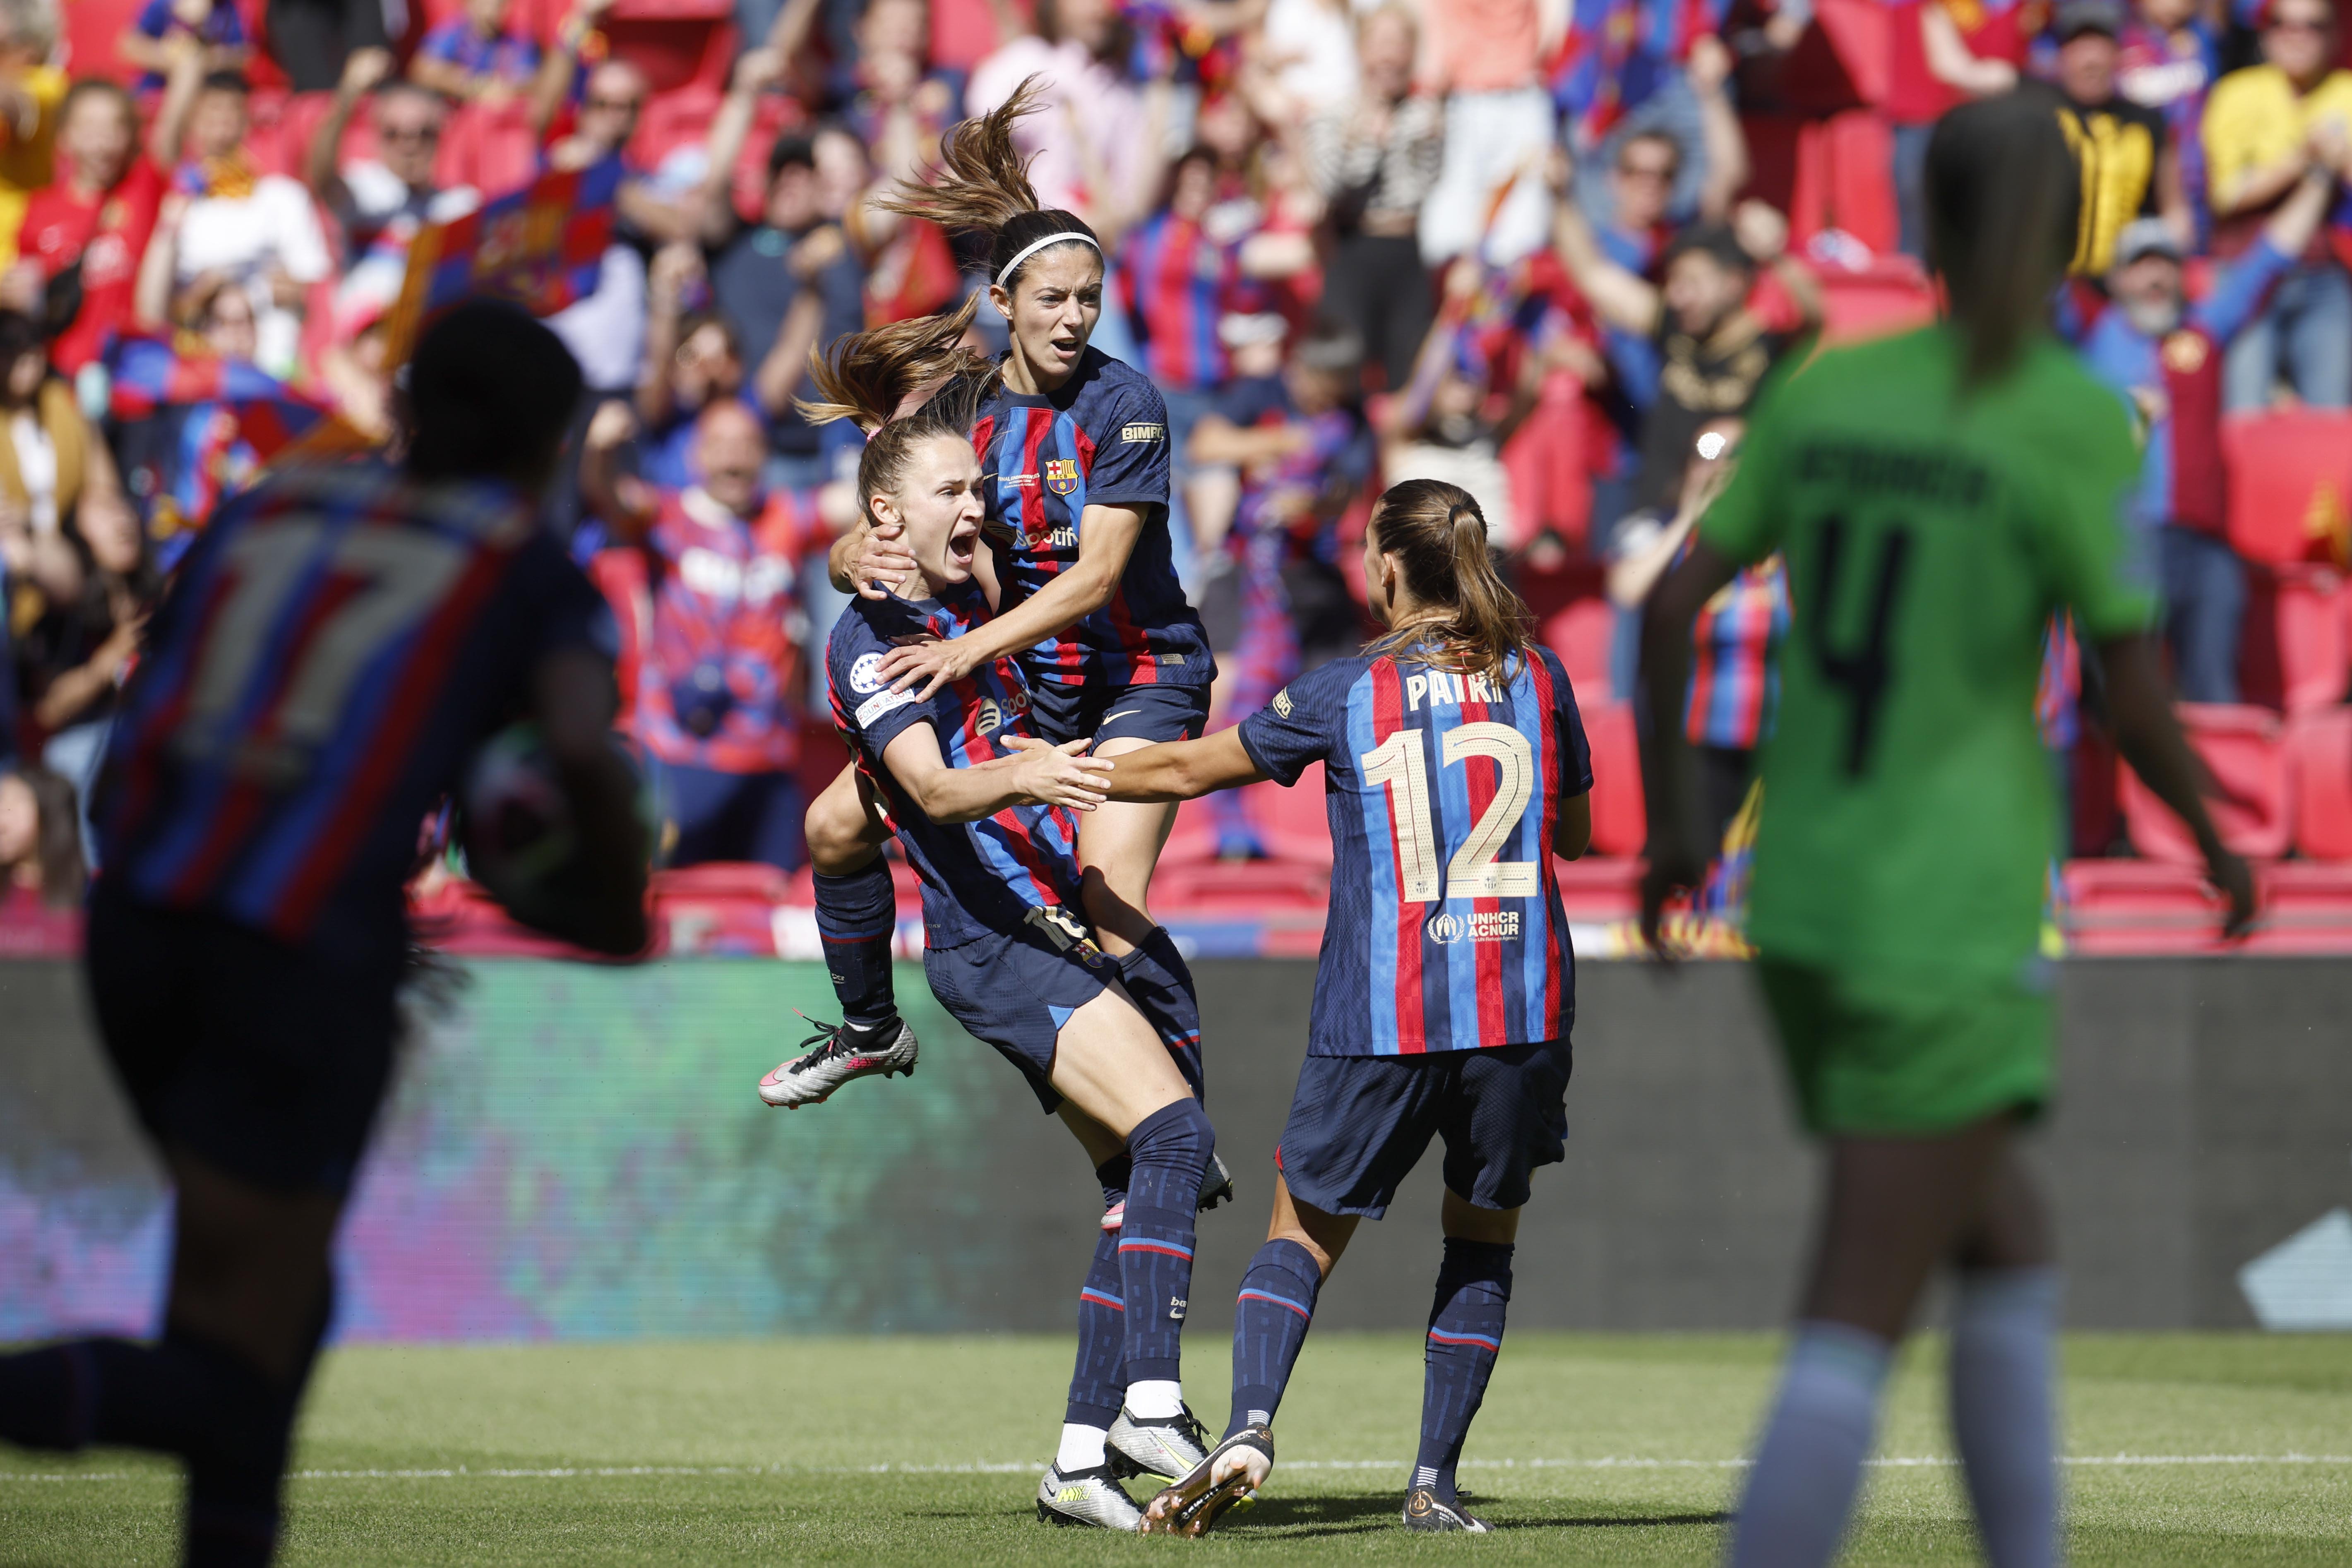 The great 'remuntada': Barça women come back from 0-2 down to win Champions League over Wolfsburg (3-2)